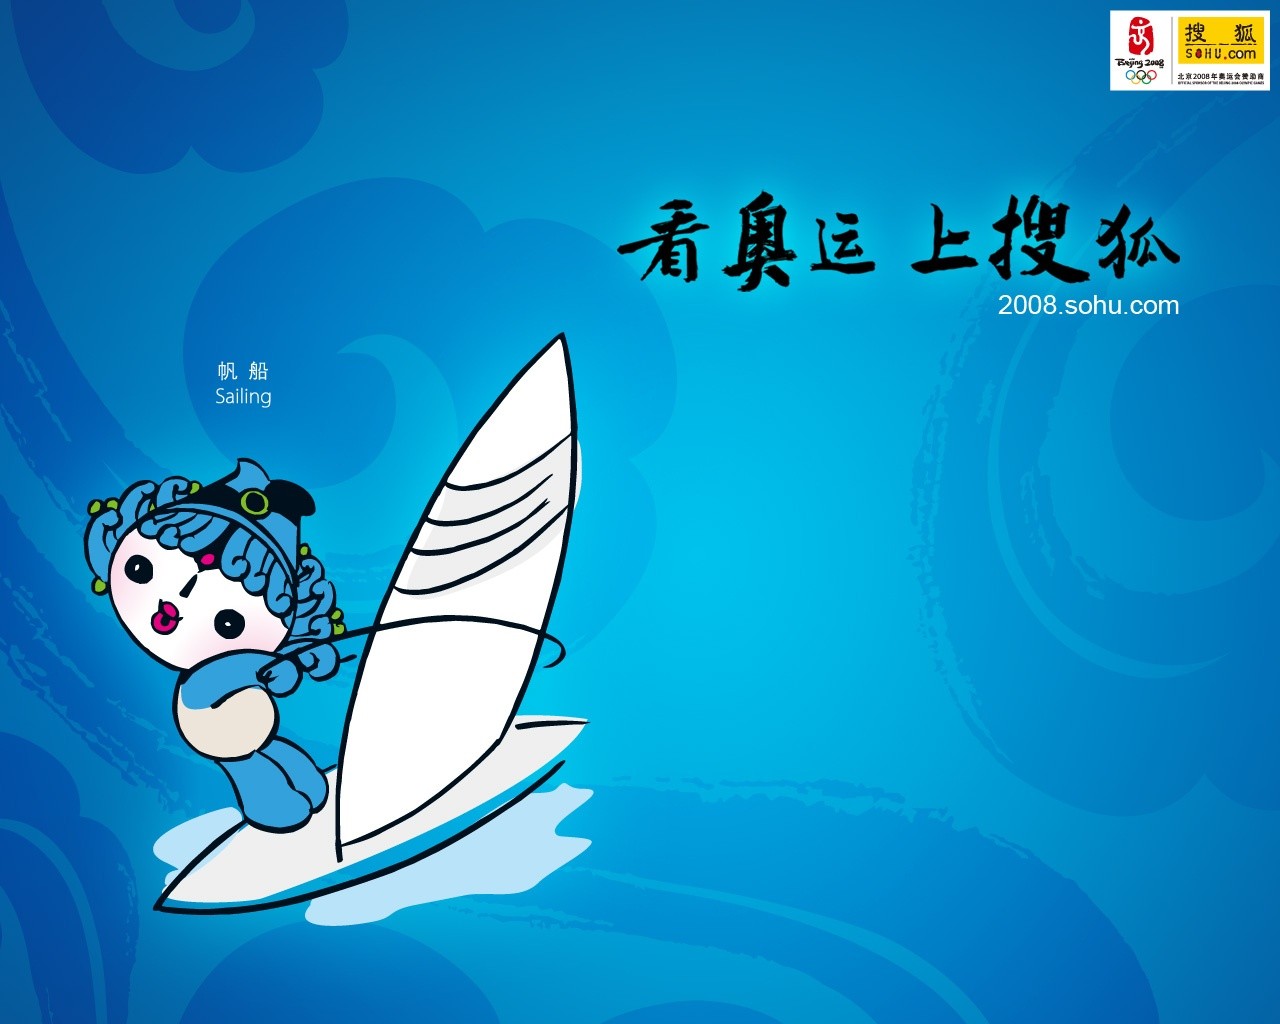 08 Olympic Games Fuwa Wallpapers #4 - 1280x1024